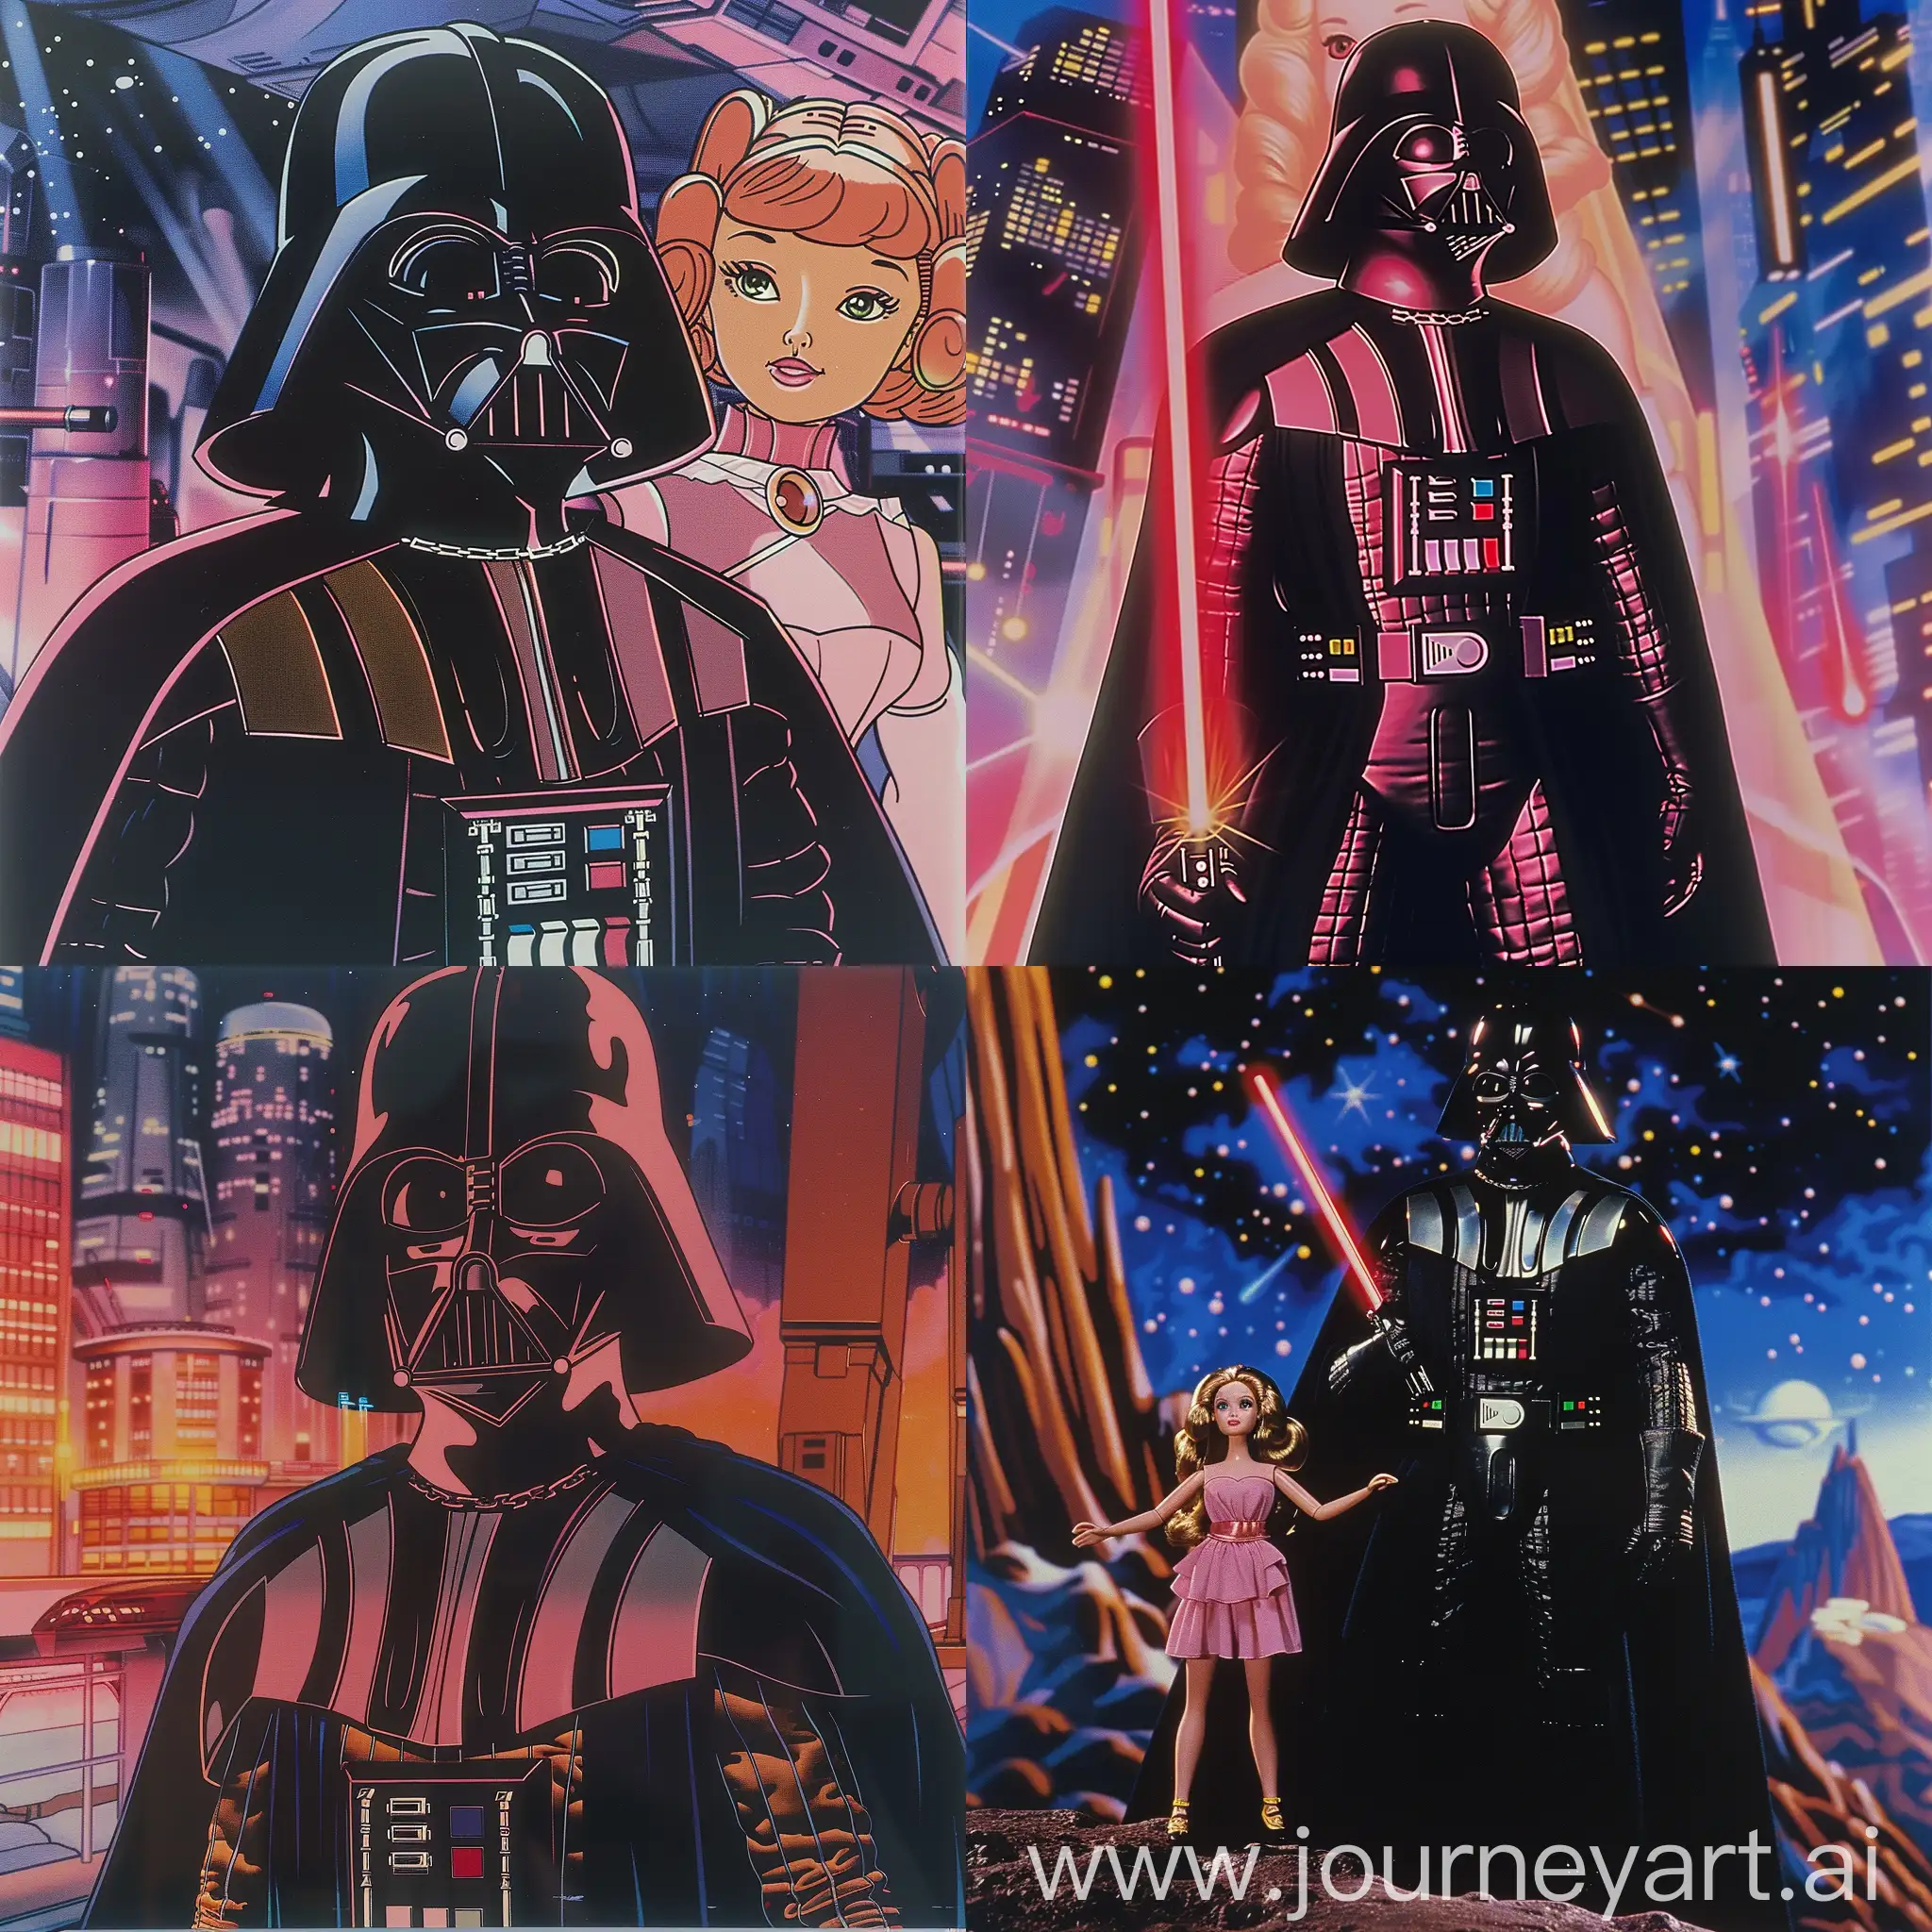 Darth Vader in anime genre film, dvd screenshot from anime film, barbie costume and 80s anime film composition